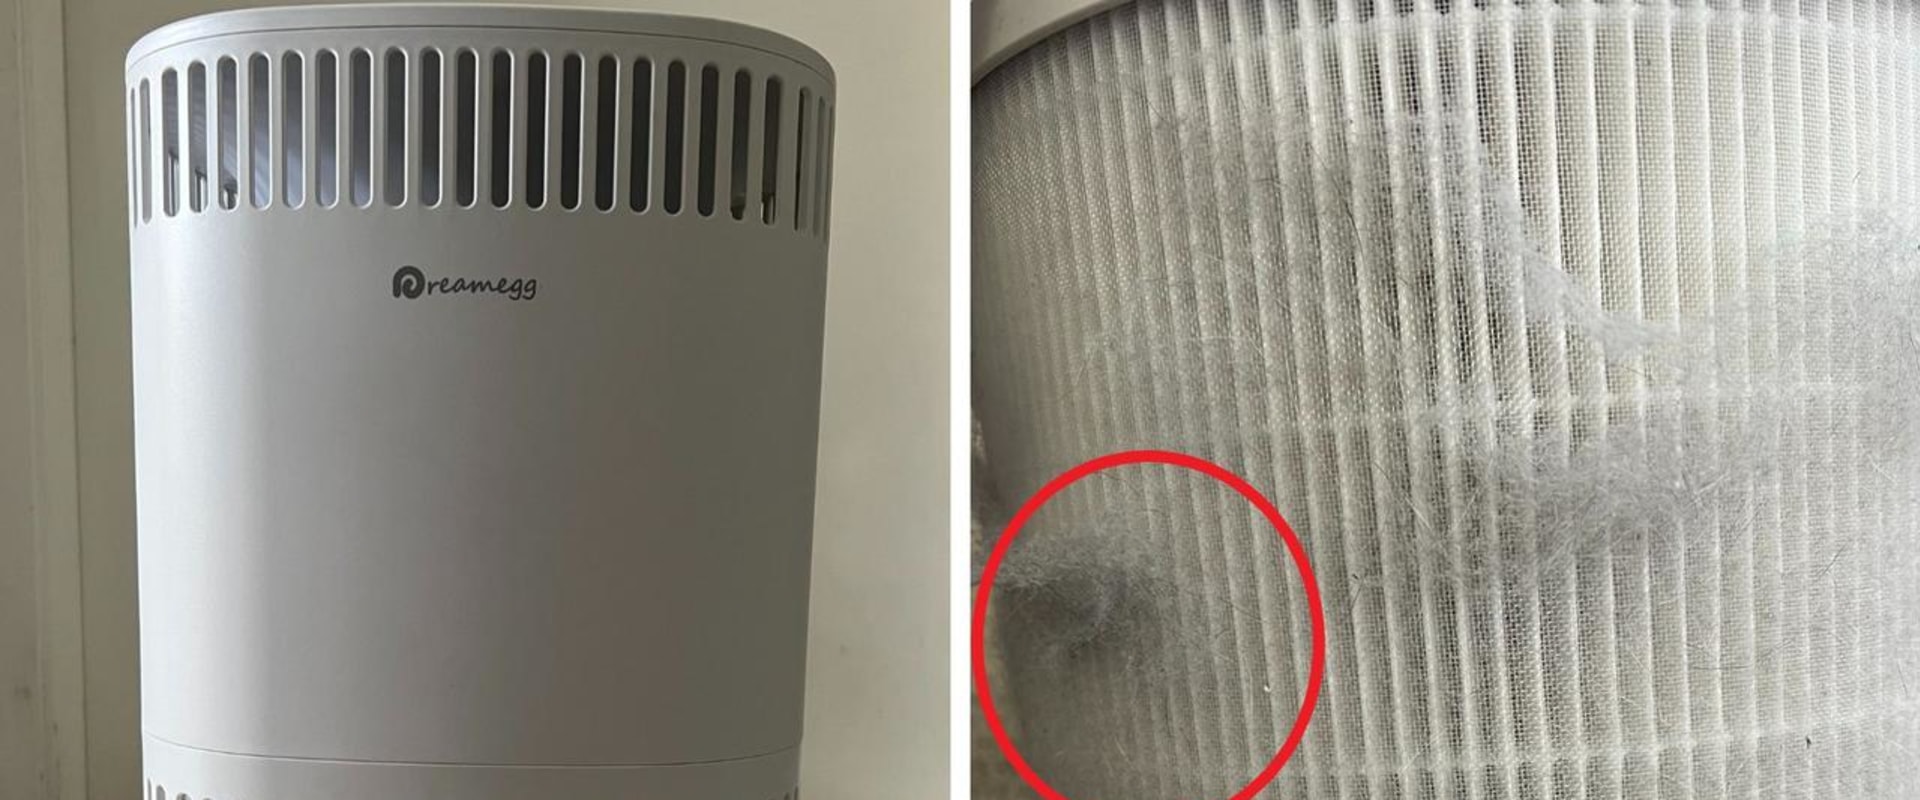 Most Budget-Friendly Furnace Air Filters Near Me